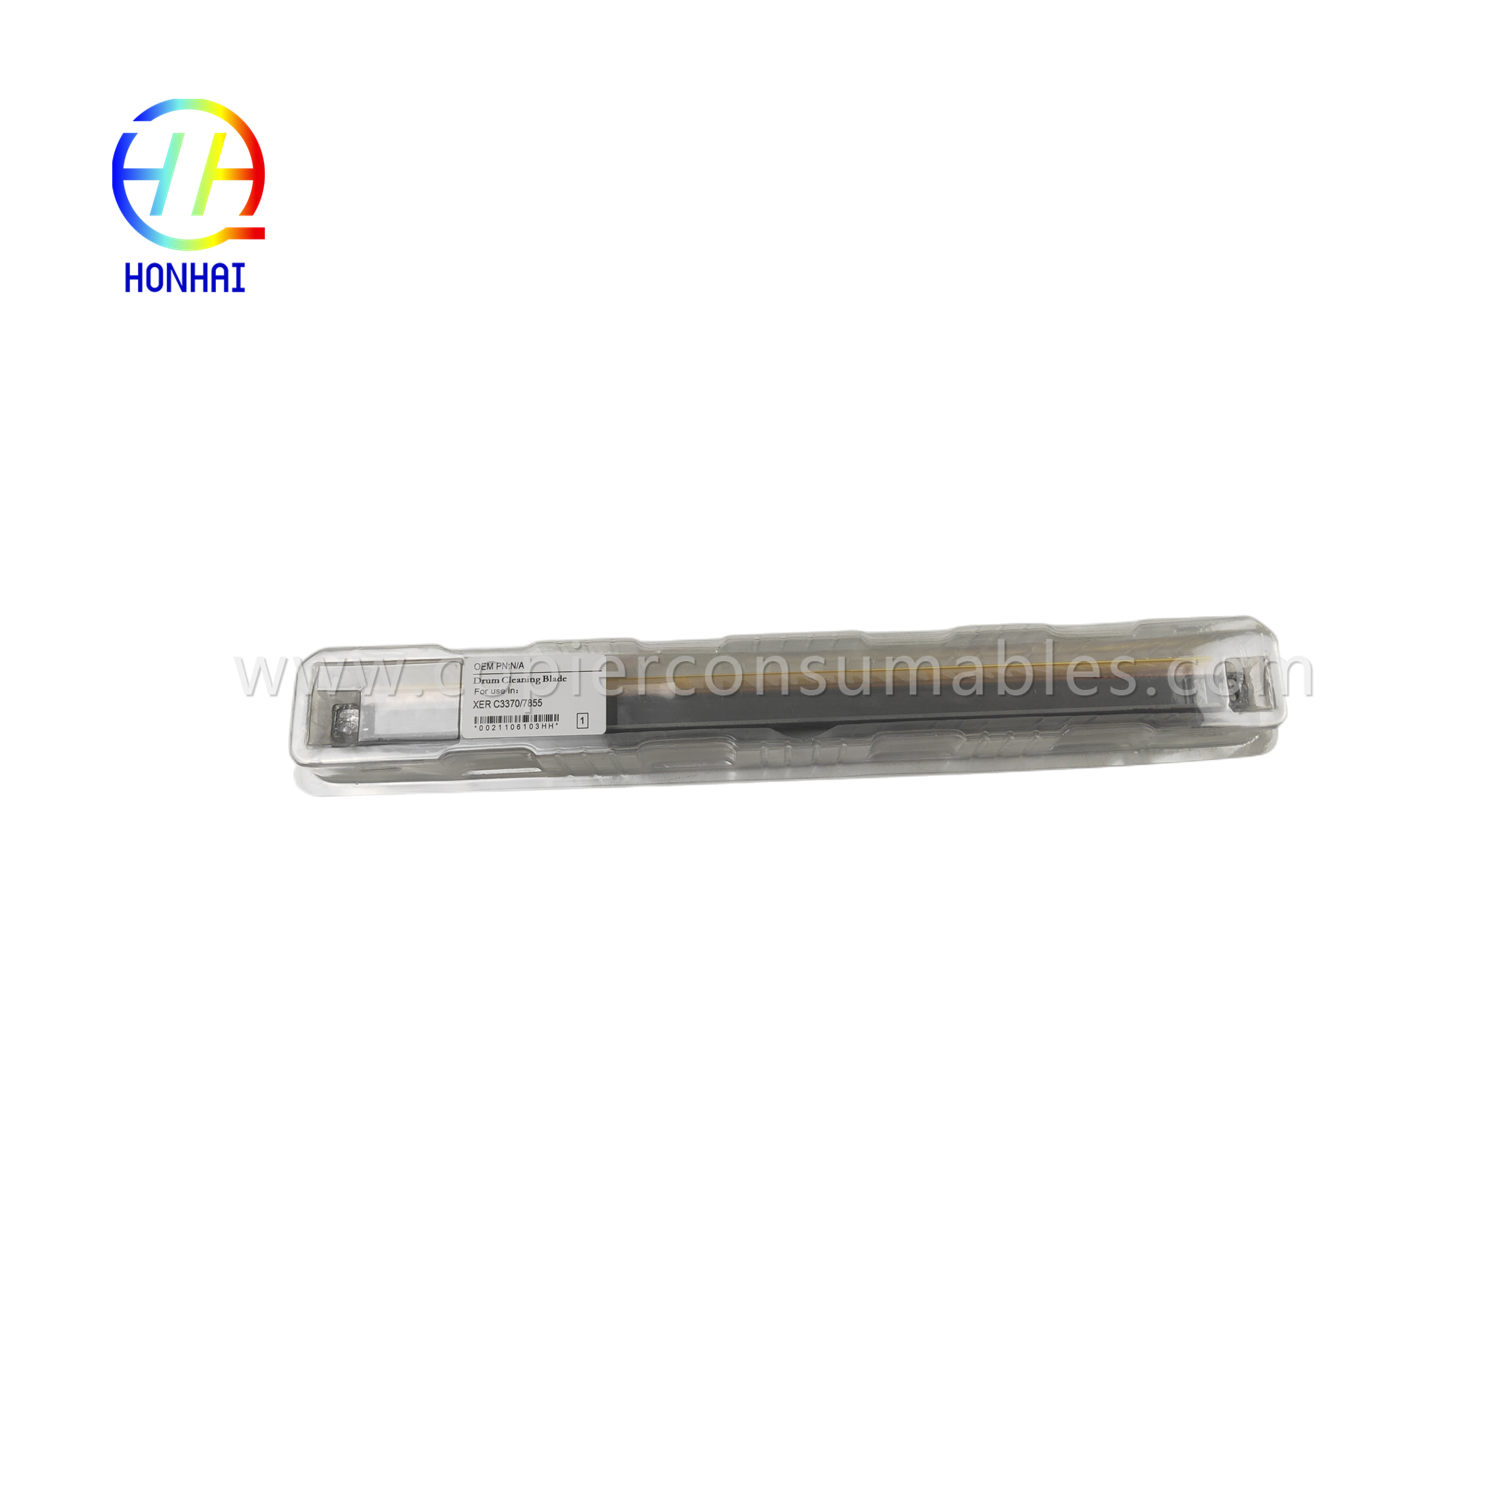 https://www.copierconsumables.com/origen-drum-cleaning-blade-for-xerox-workcentre-7525-7530-7535-7545-7556-7830-7835-7845-7855-product/